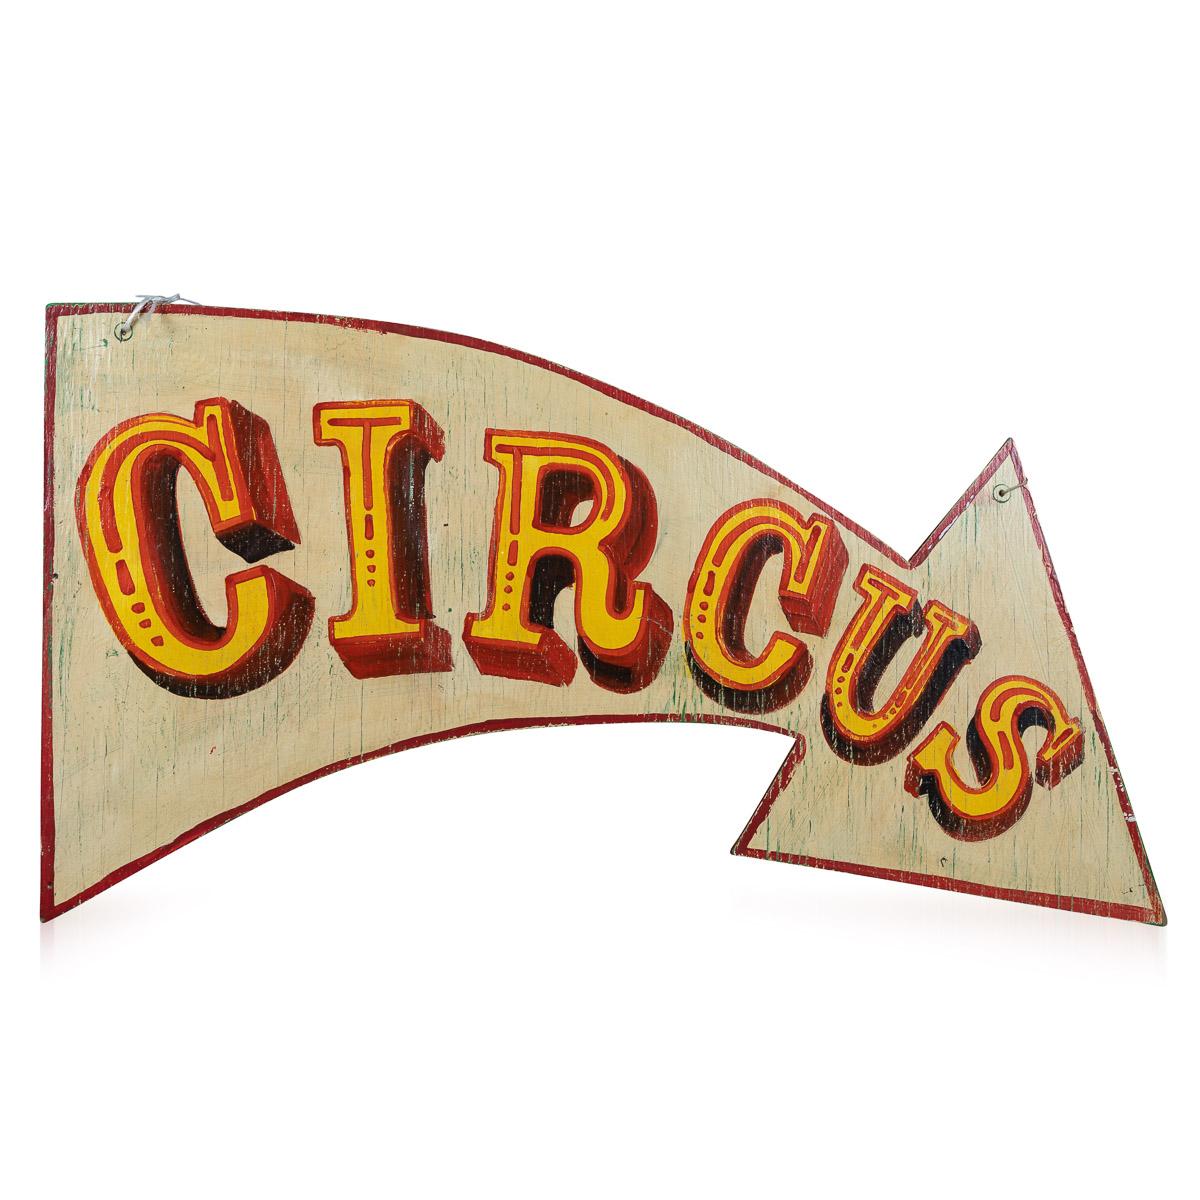 Novelty 20th Century set of four wood painted fairground / circus signs. Each sign is of different size and shape and have been adapted to hang on the wall. A real conversation piece and a novelty piece of decor.



CONDITION
In Great Condition